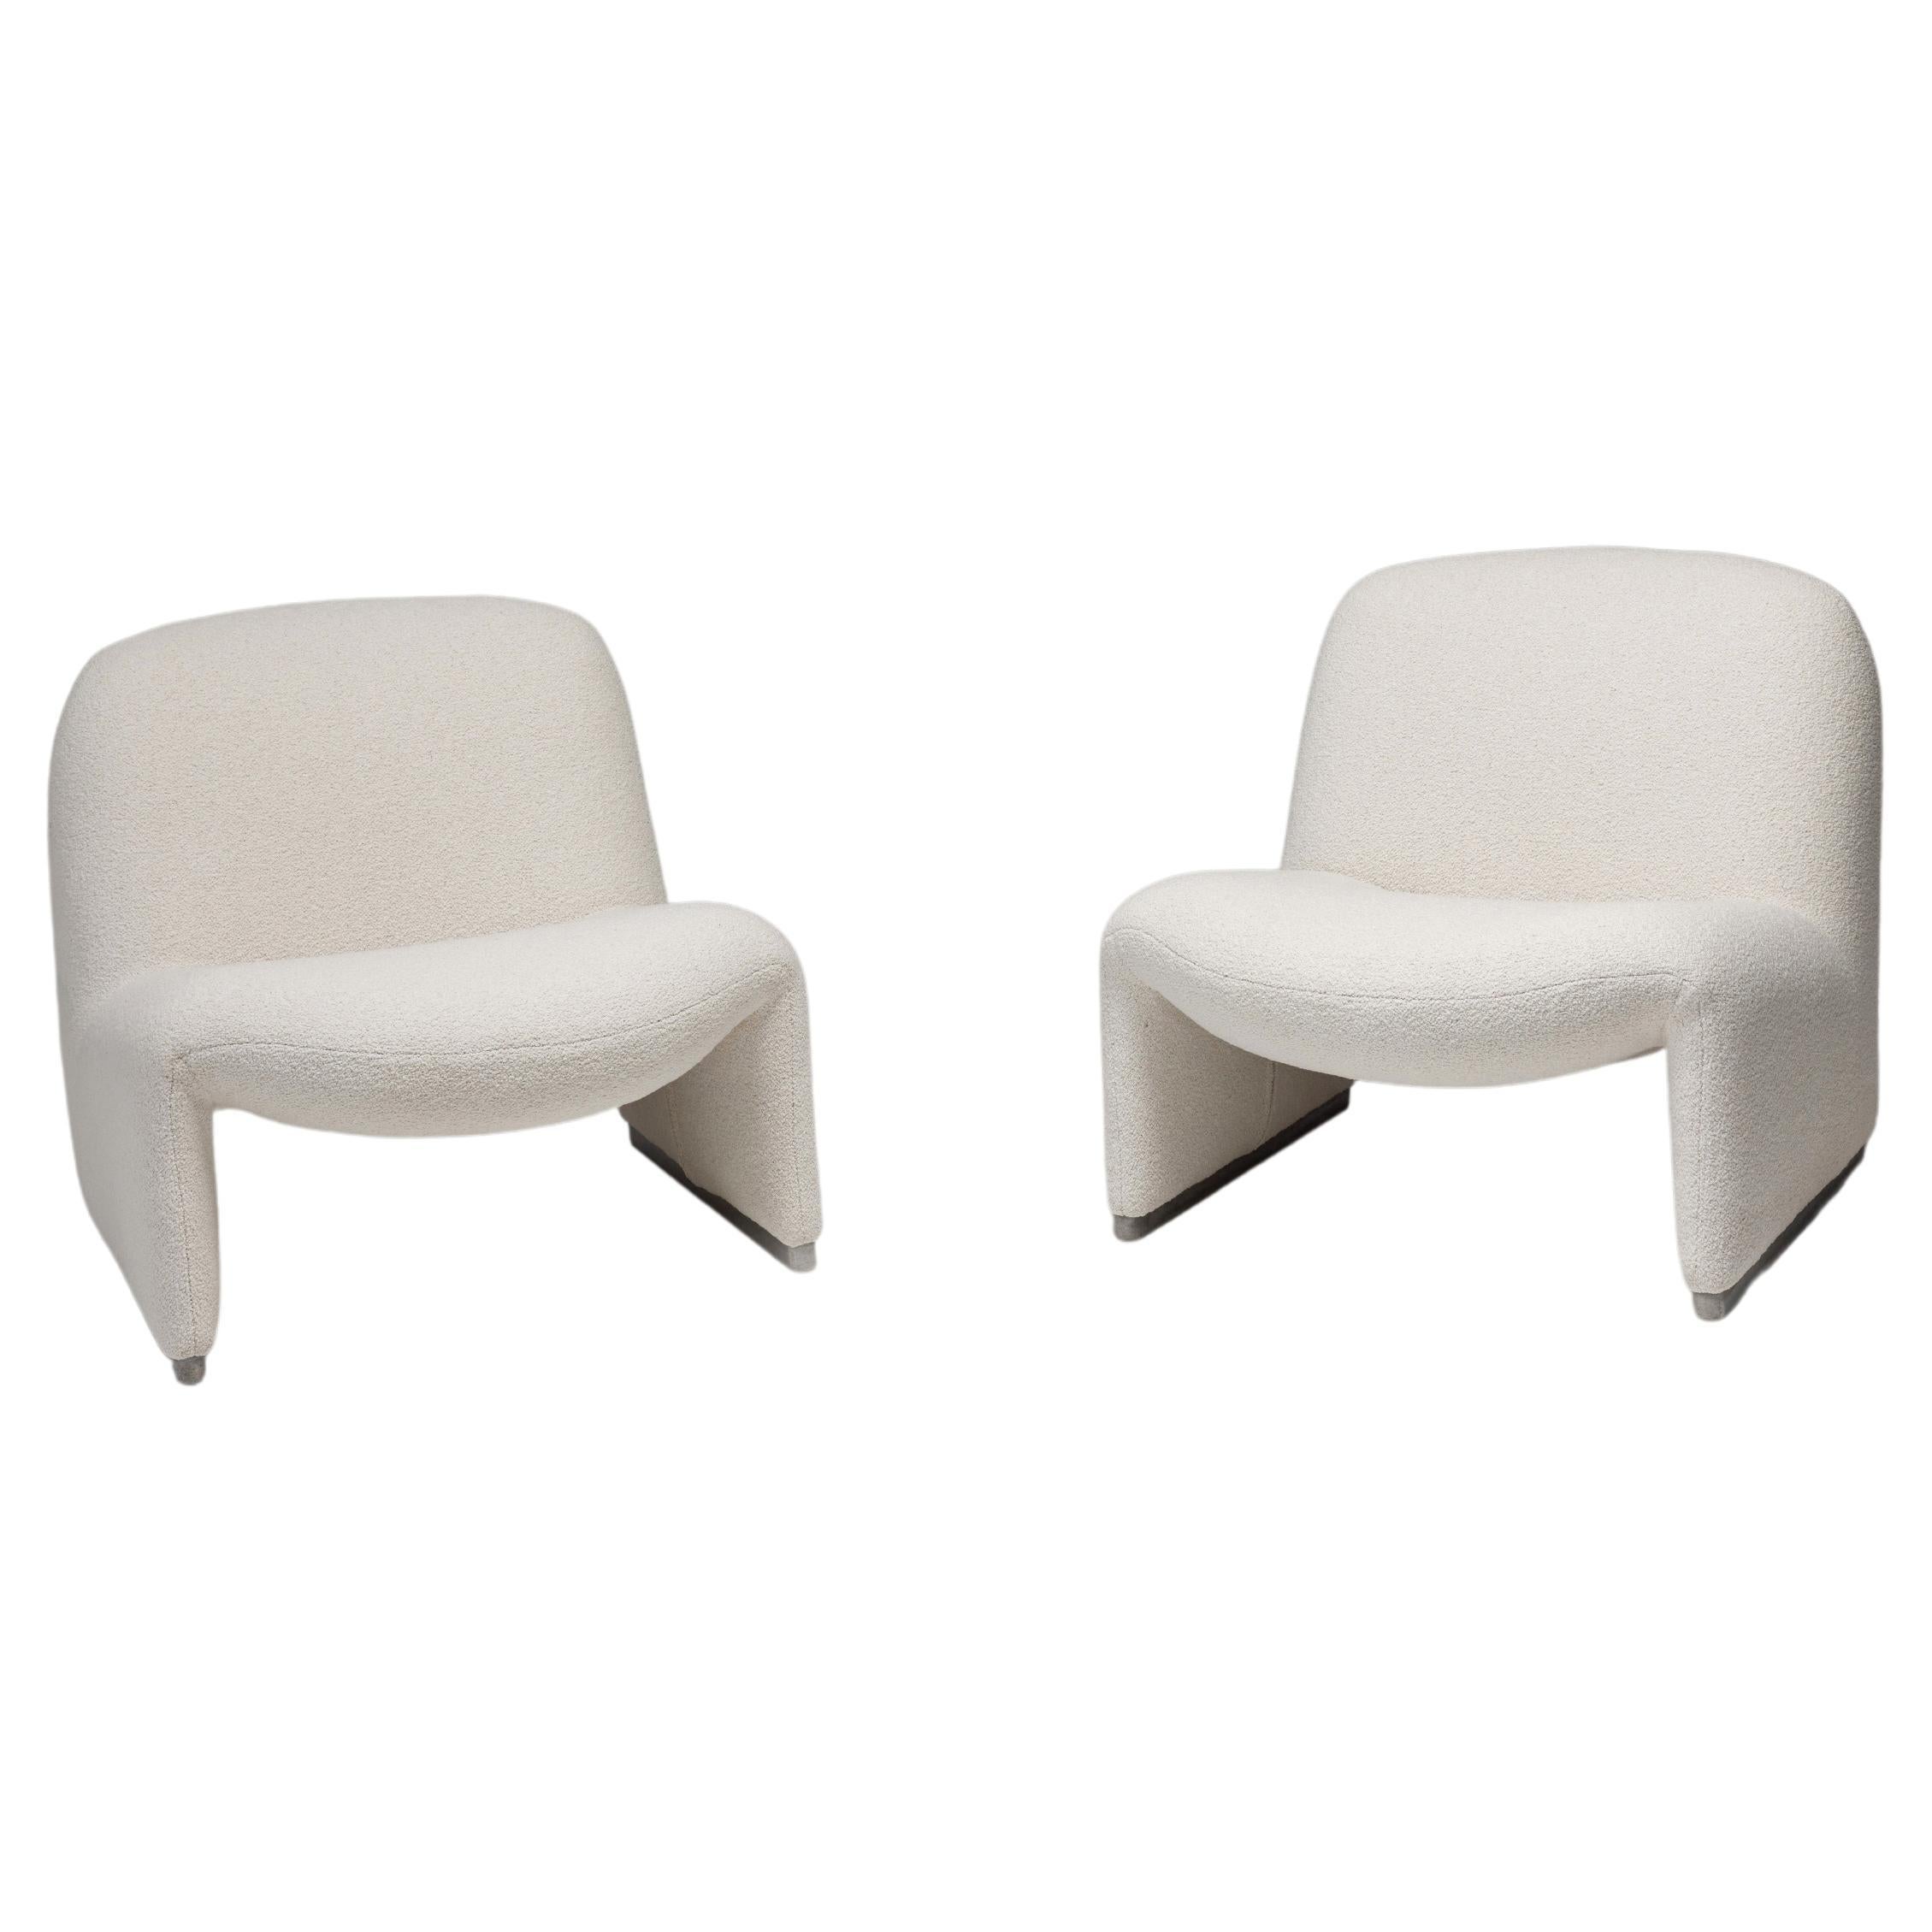 Vintage Alky Chairs in Off-White Fabric by Giancarlo Piretti for Artifort, 1970s For Sale